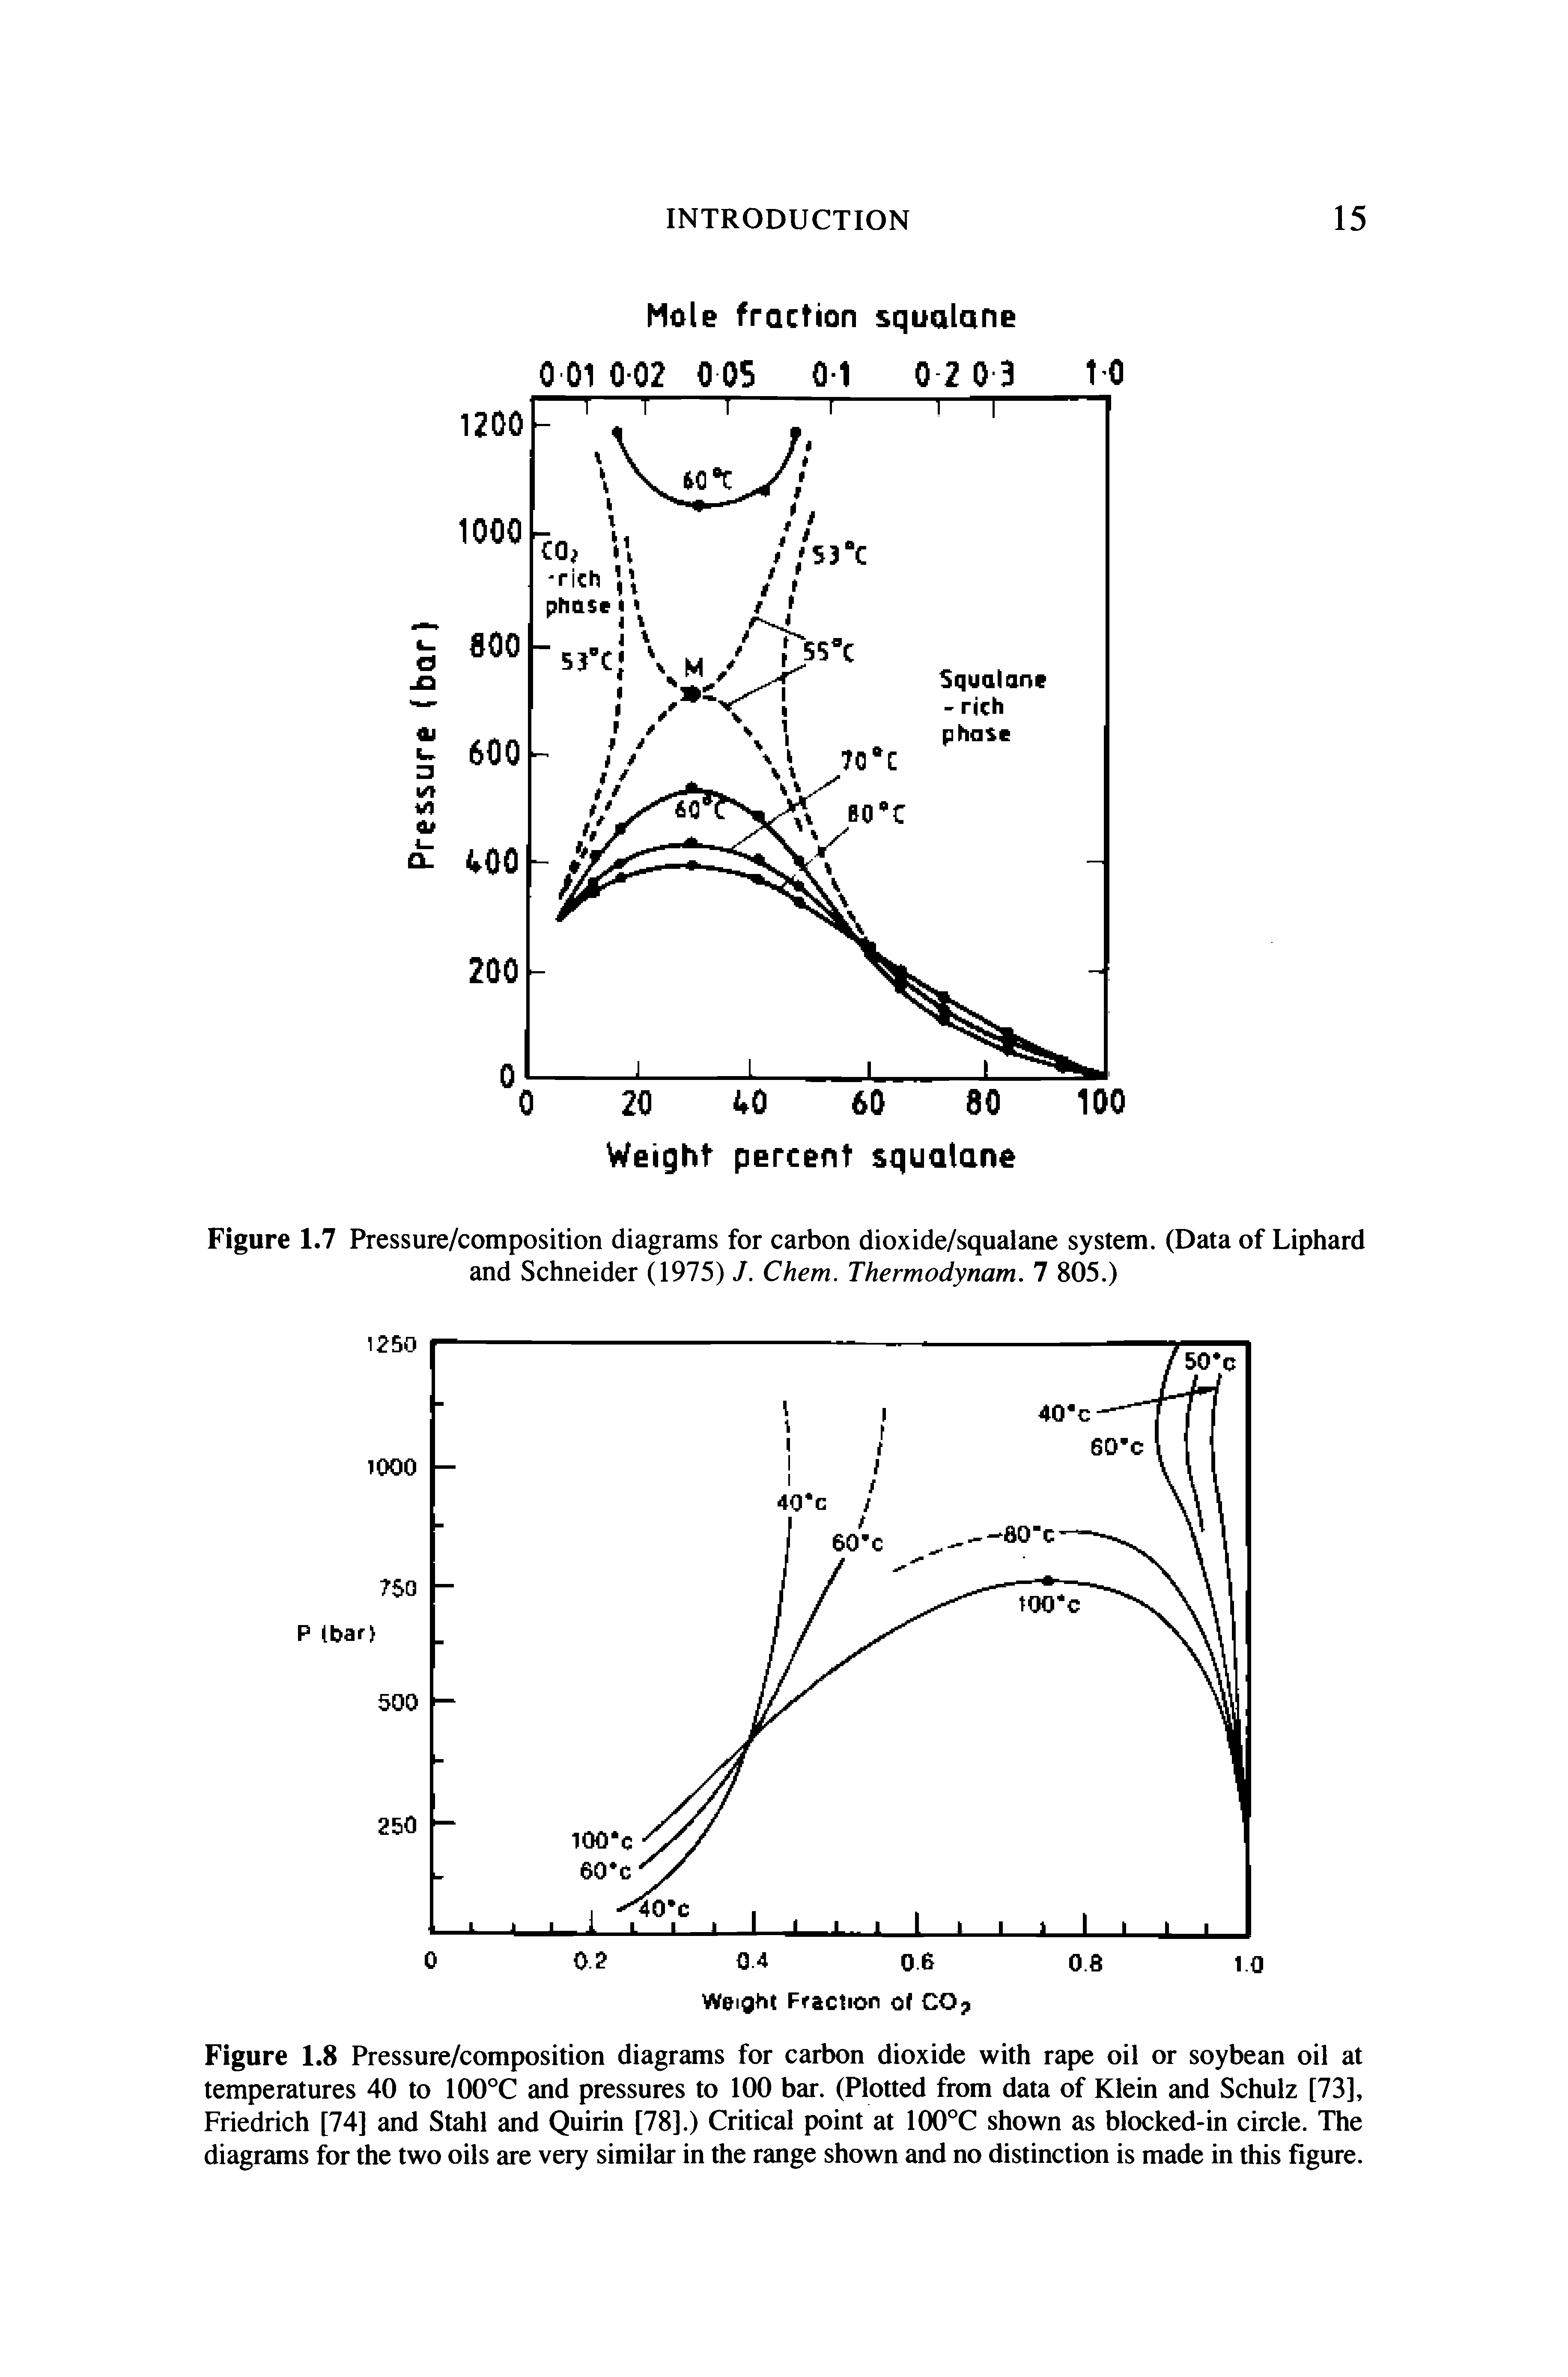 Figure 1.7 Pressure/composition diagrams for carbon dioxide/squalane system. (Data of Liphard and Schneider (1975) J. Chem. Thermodynam. 1 805.)...